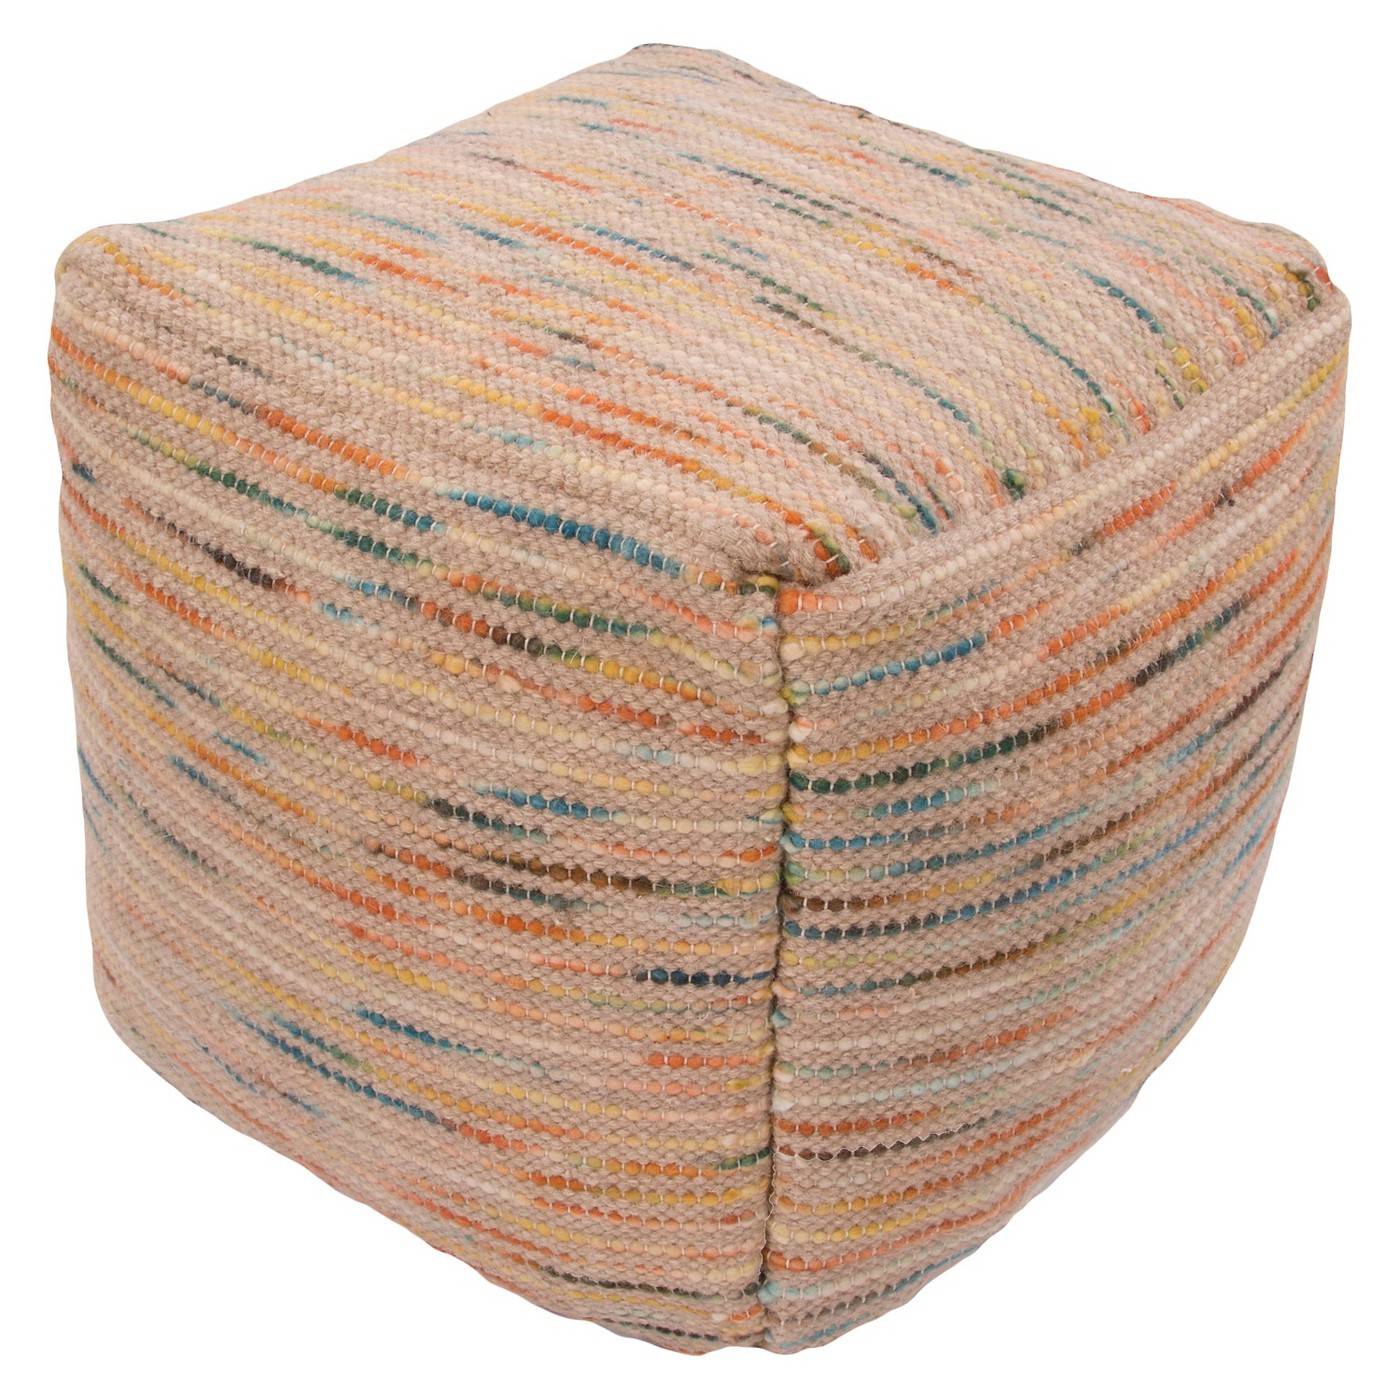 Square shaped colorful pouf.